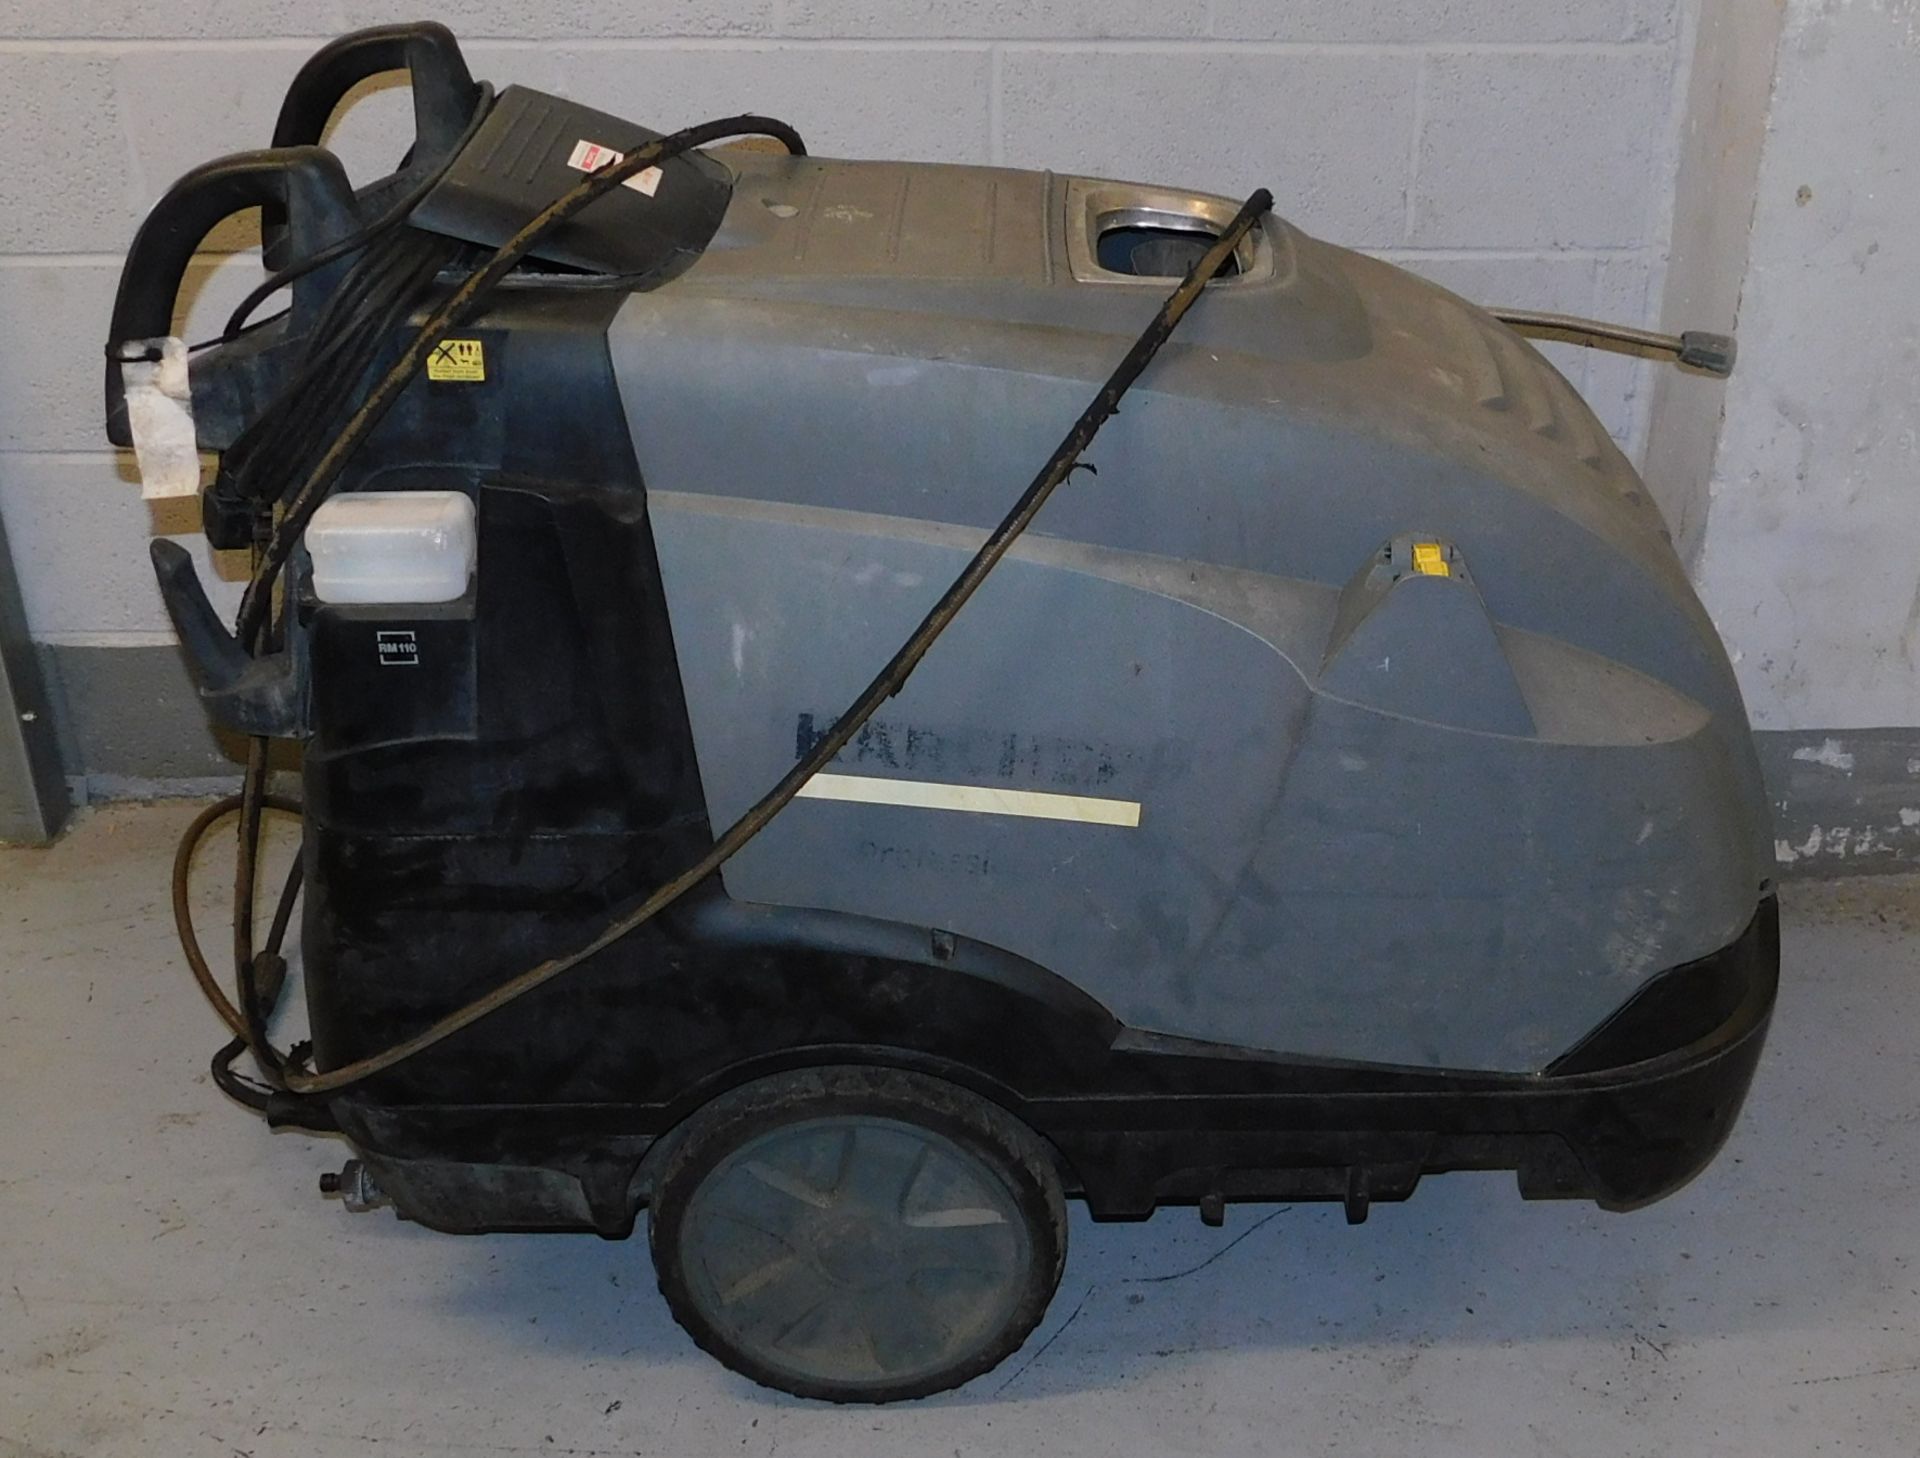 Karcher 7/10-4M Pressure Washer, Serial No; 011350 (2018) (Located Stockport – See General Notes for